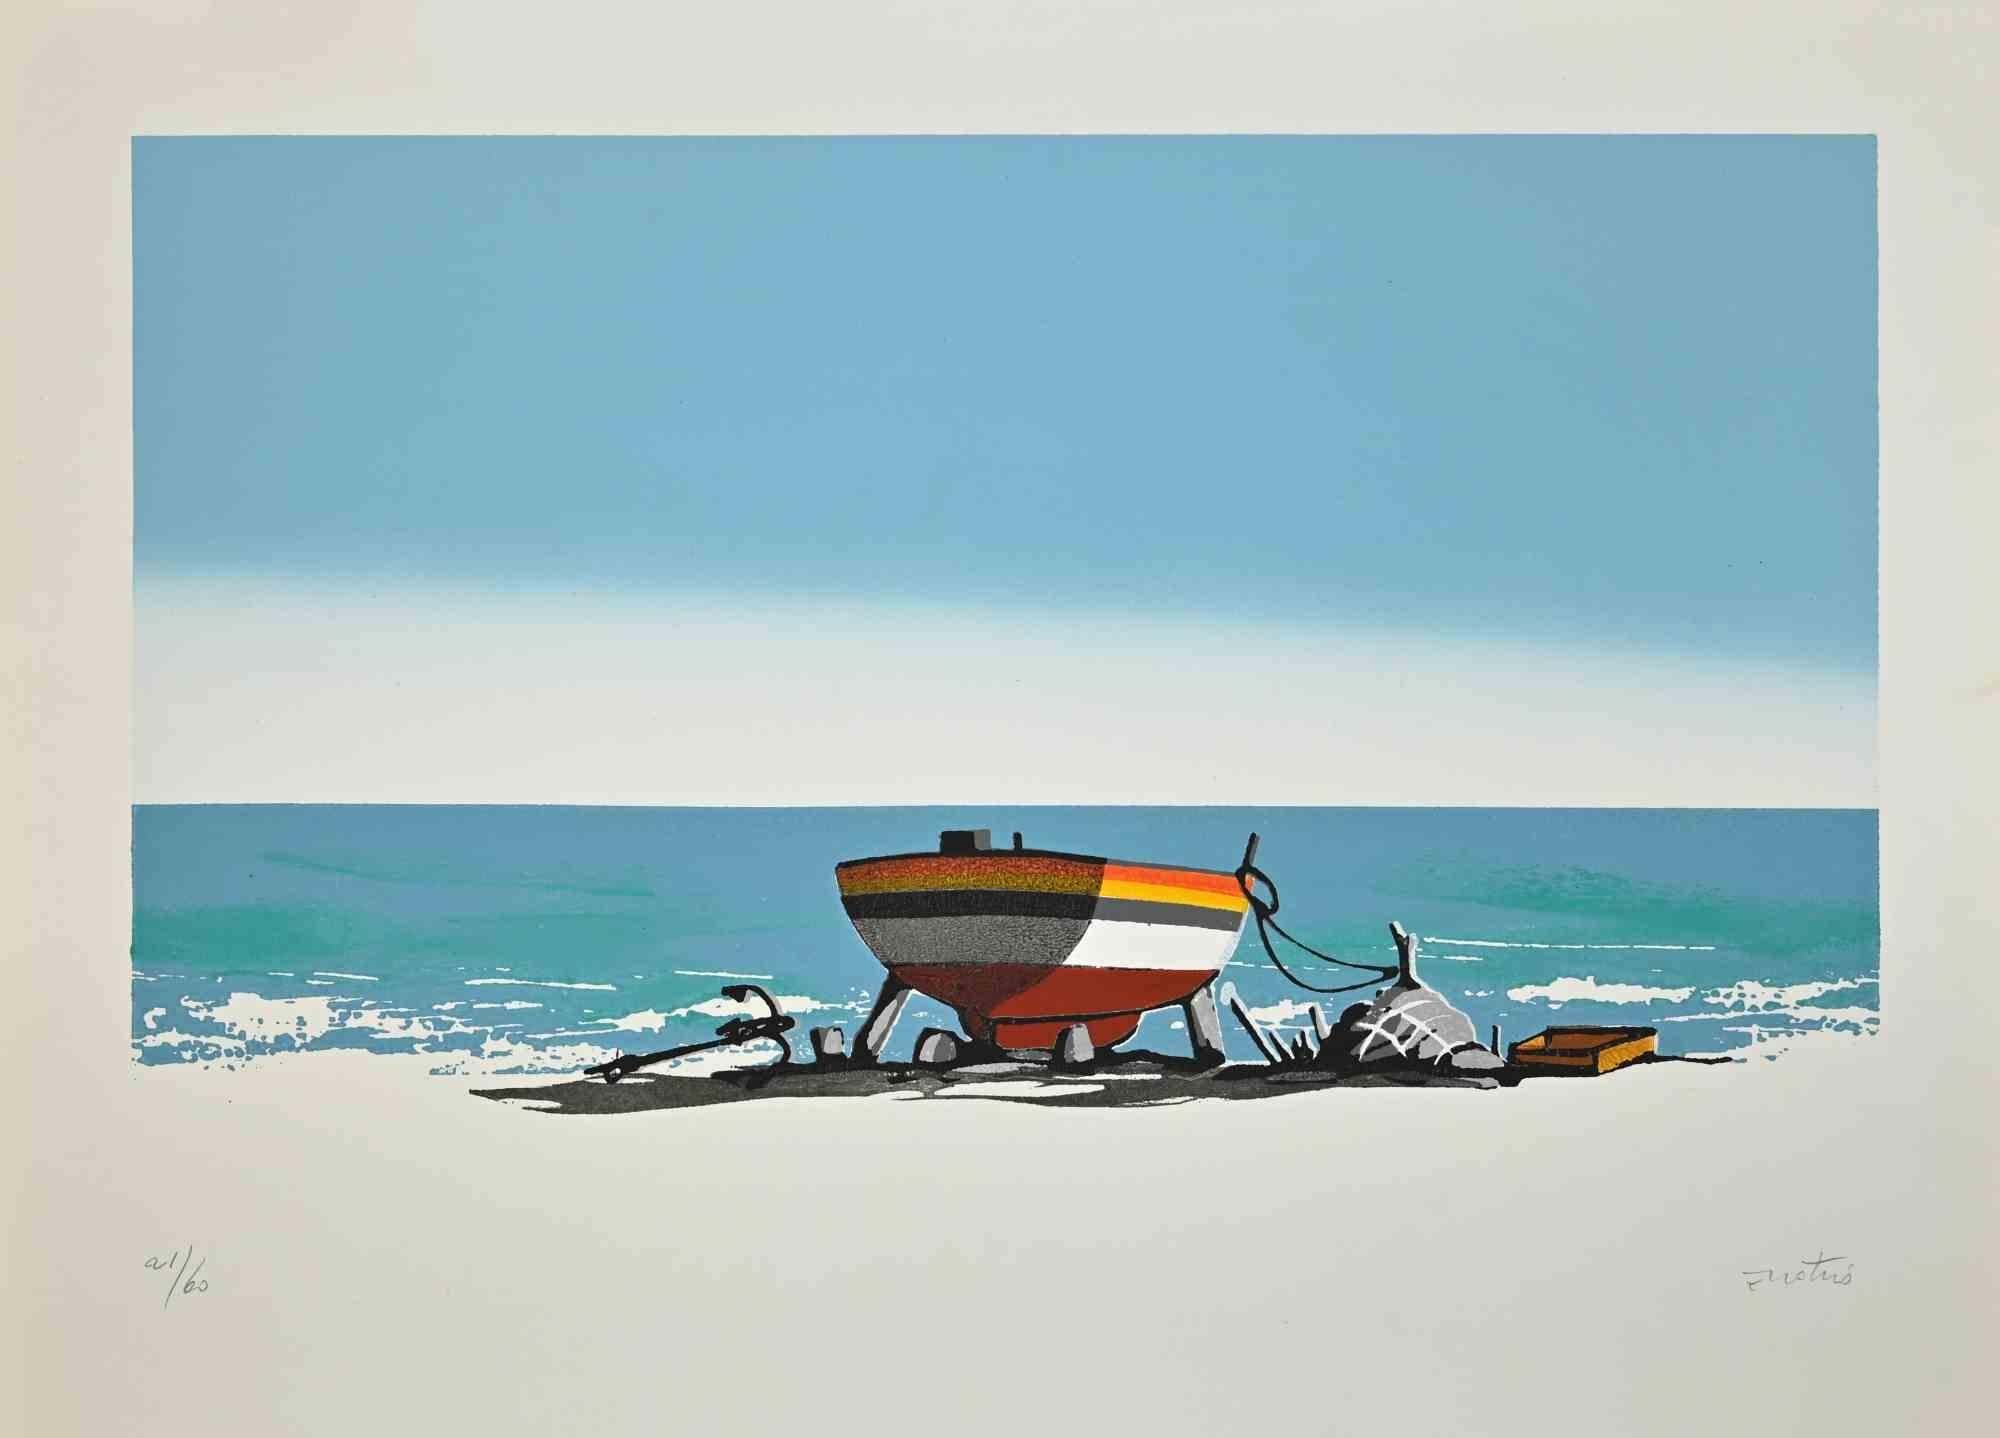 Seascape With A Boat - Screen Print by Enotrio Pugliese - 1960s